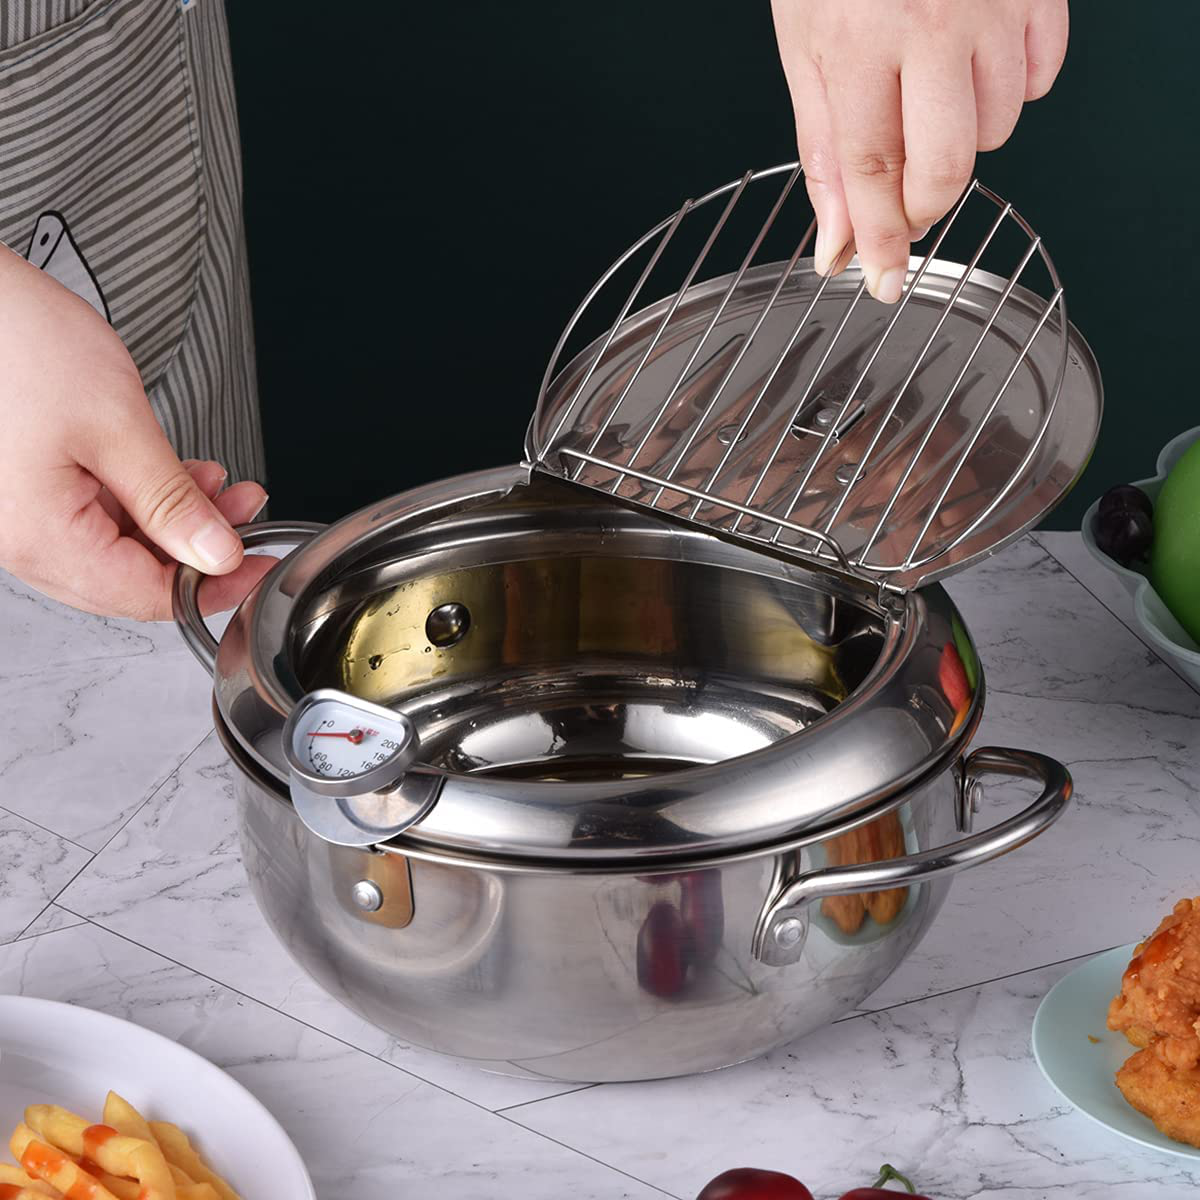 Prodent Oil Fryer Frying Pot,Non-stick Stainless Steel Deep Fryer Pot with Thermometer and Oil Drip Rack Lid,Tempura Fryer Pan with Handle for Home Fry Chicken Chips Fish Shrimp(9.4inch,silver)